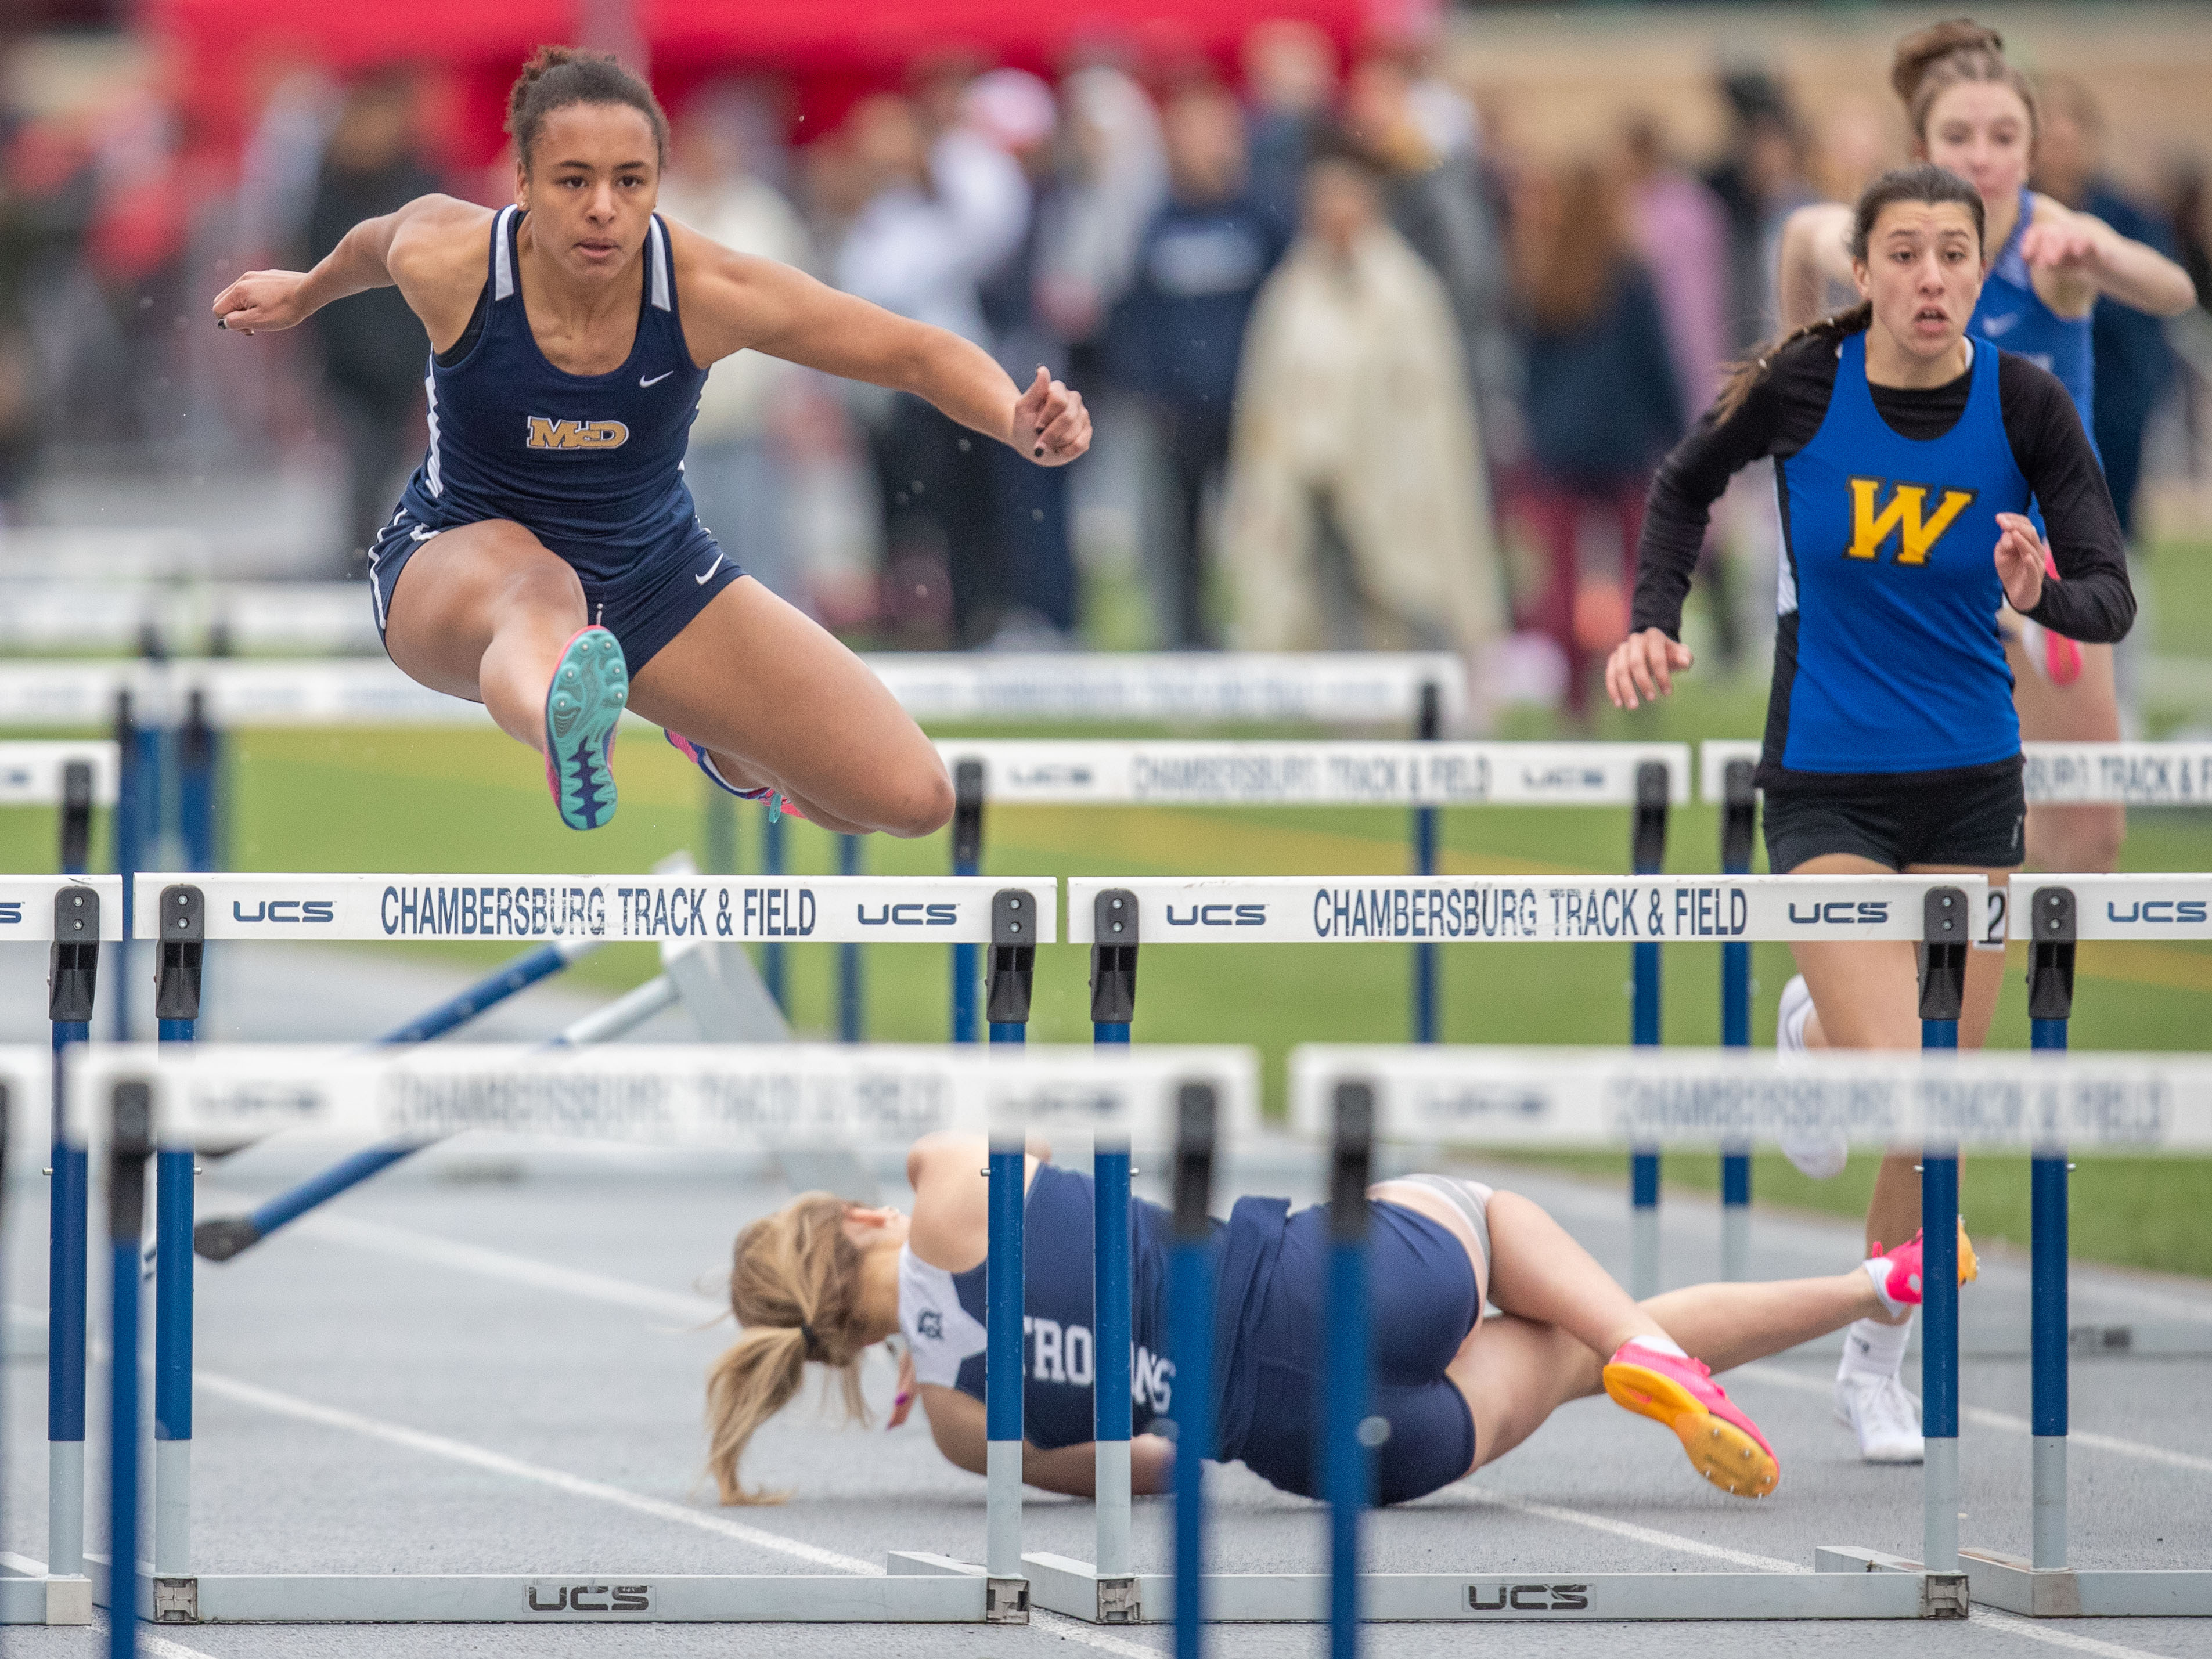 Maddy Brooks, Bishop McDevitt, wins the 100m hurdles, as Chambersburg’s Ella Fatyol takes a tumble, in the 2023 Tim Cook Memorial Invitational track & field meet at Chambersburg, Pa., Mar. 25, 2023.Mark Pynes | pennlive.com